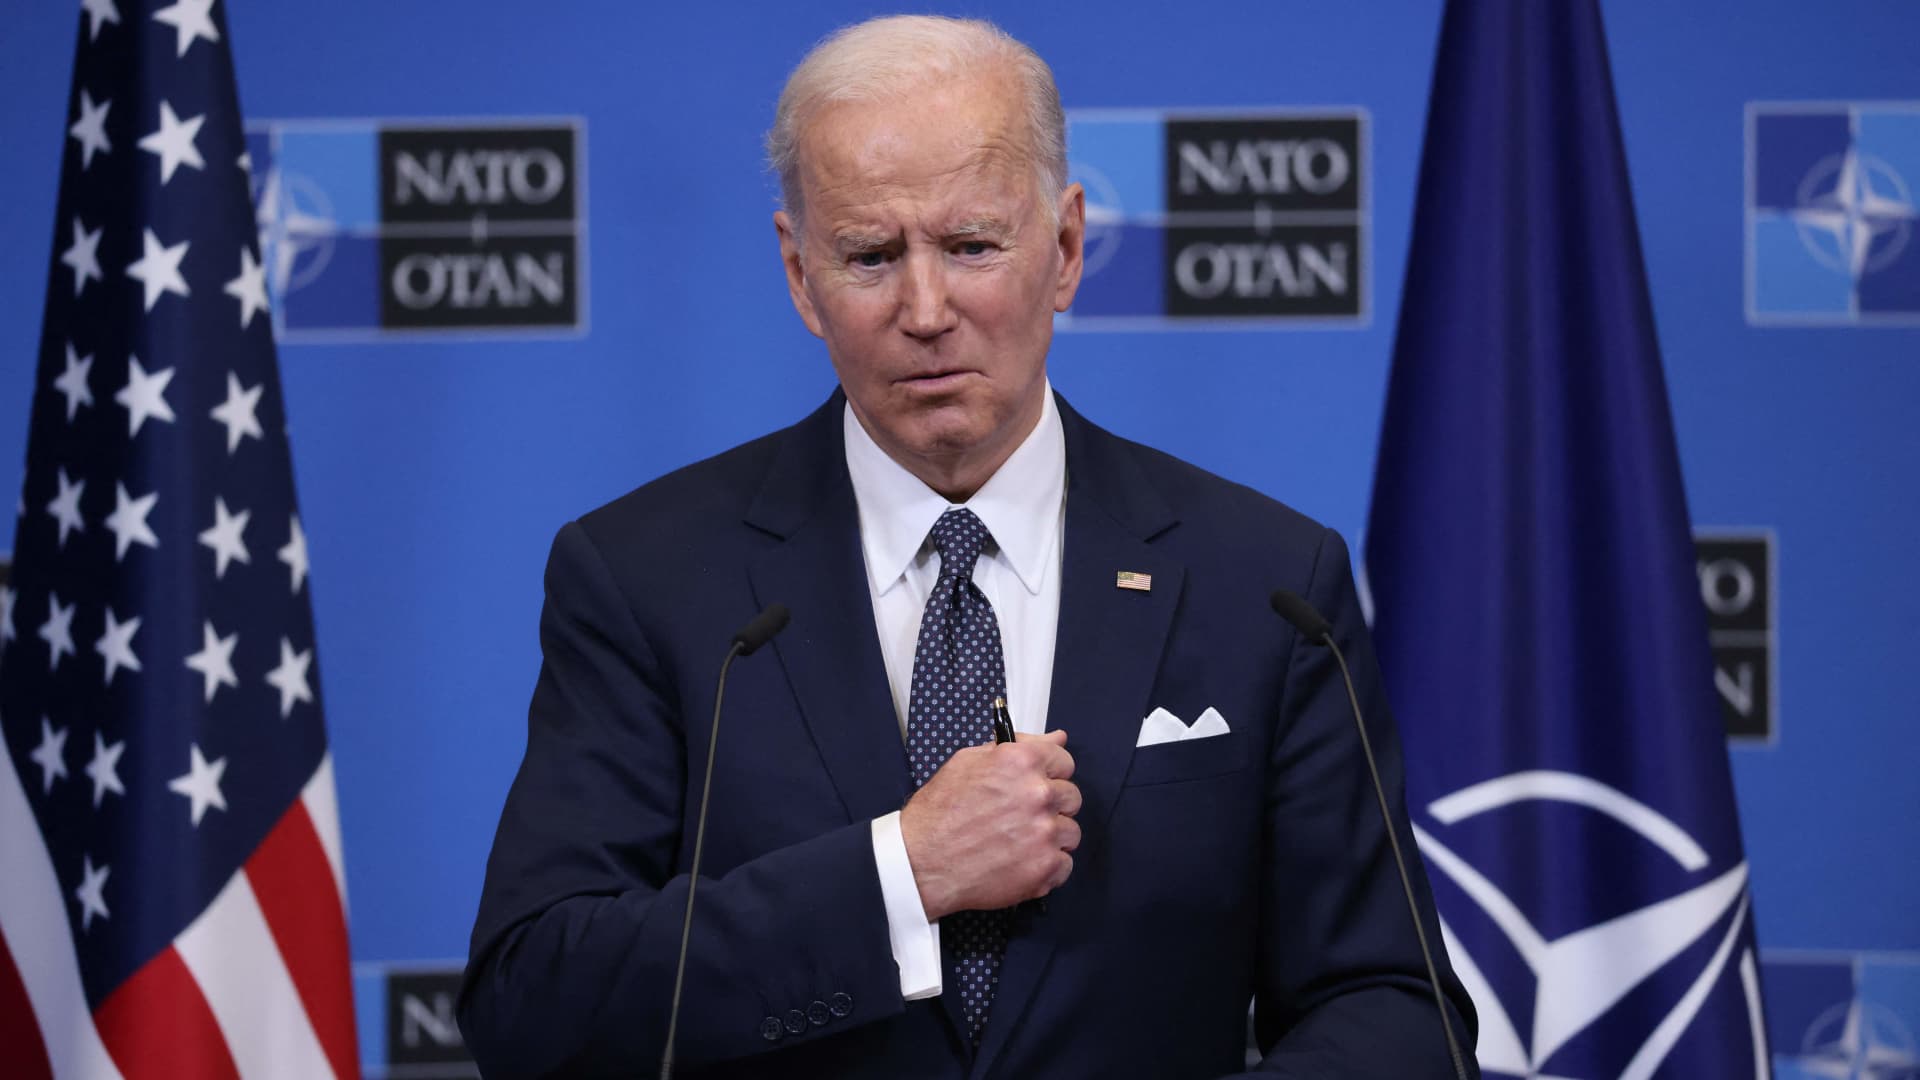 Biden says U.S. would 'respond' to Russia if Putin uses chemical or biological weapons